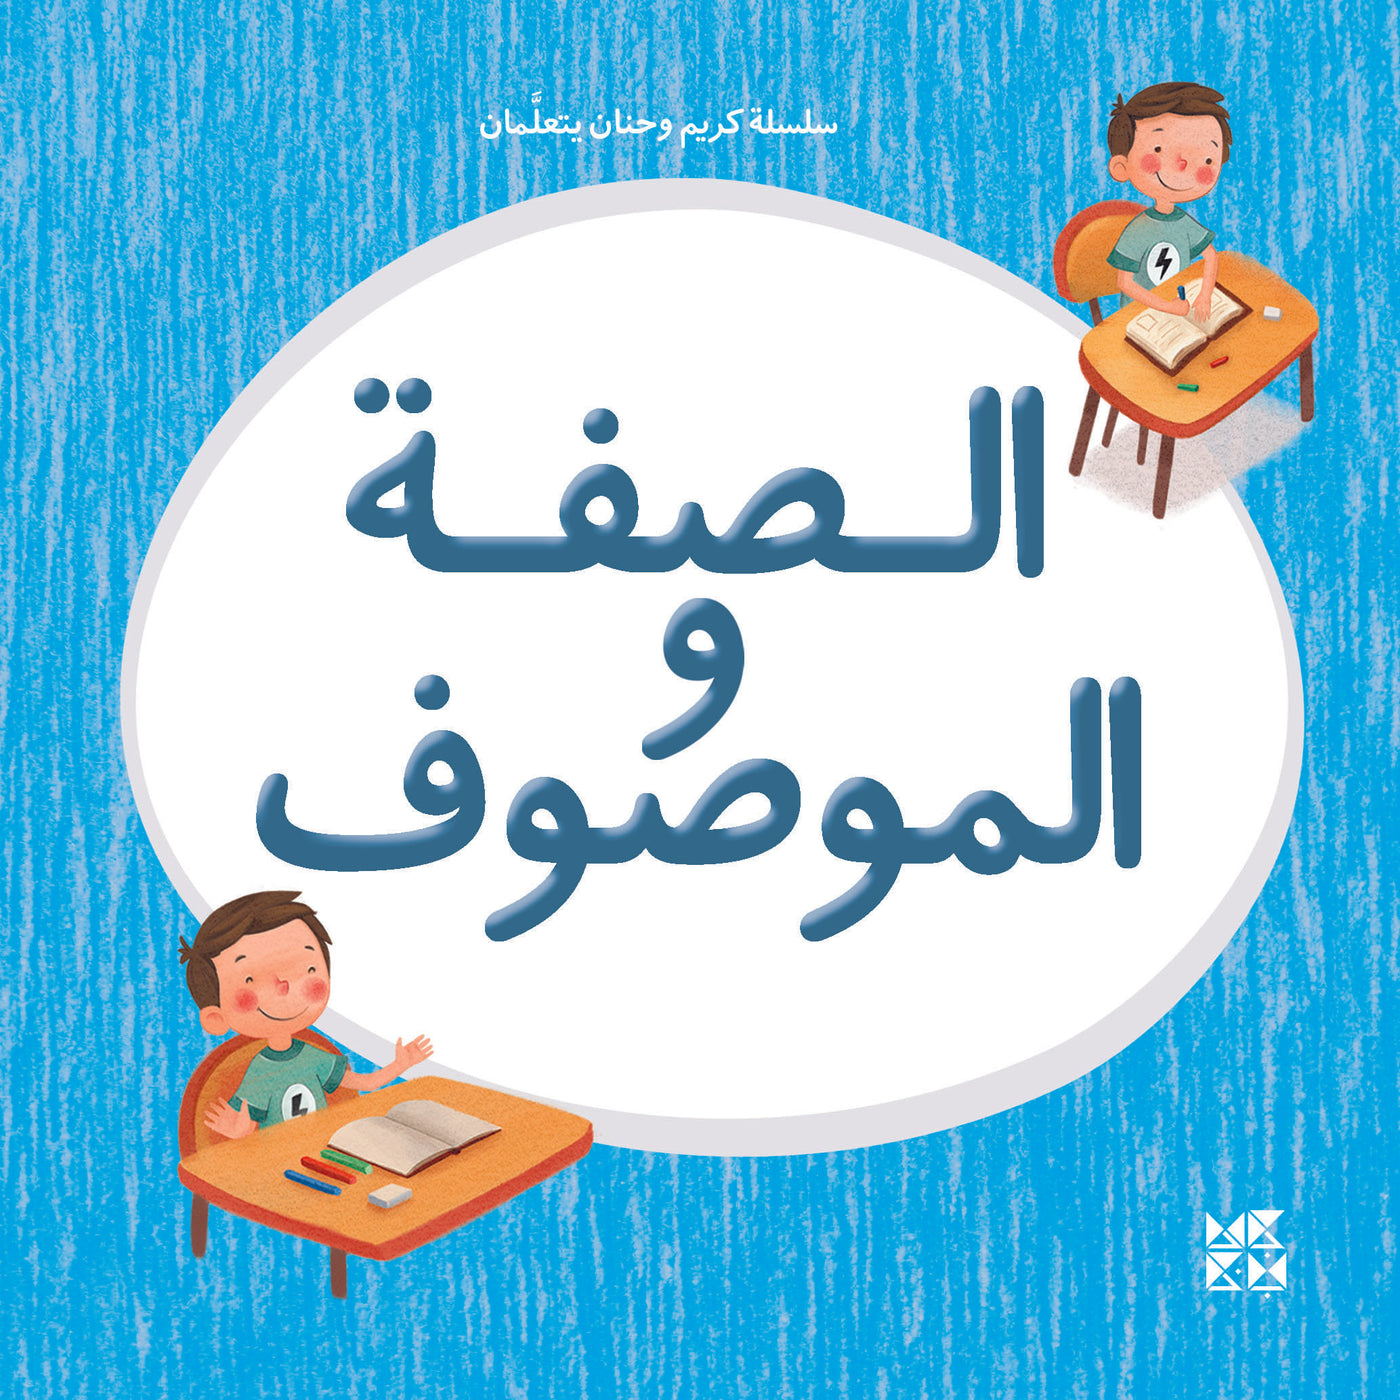 Karim and Hanan Are Learning: Adjectives Book Cover